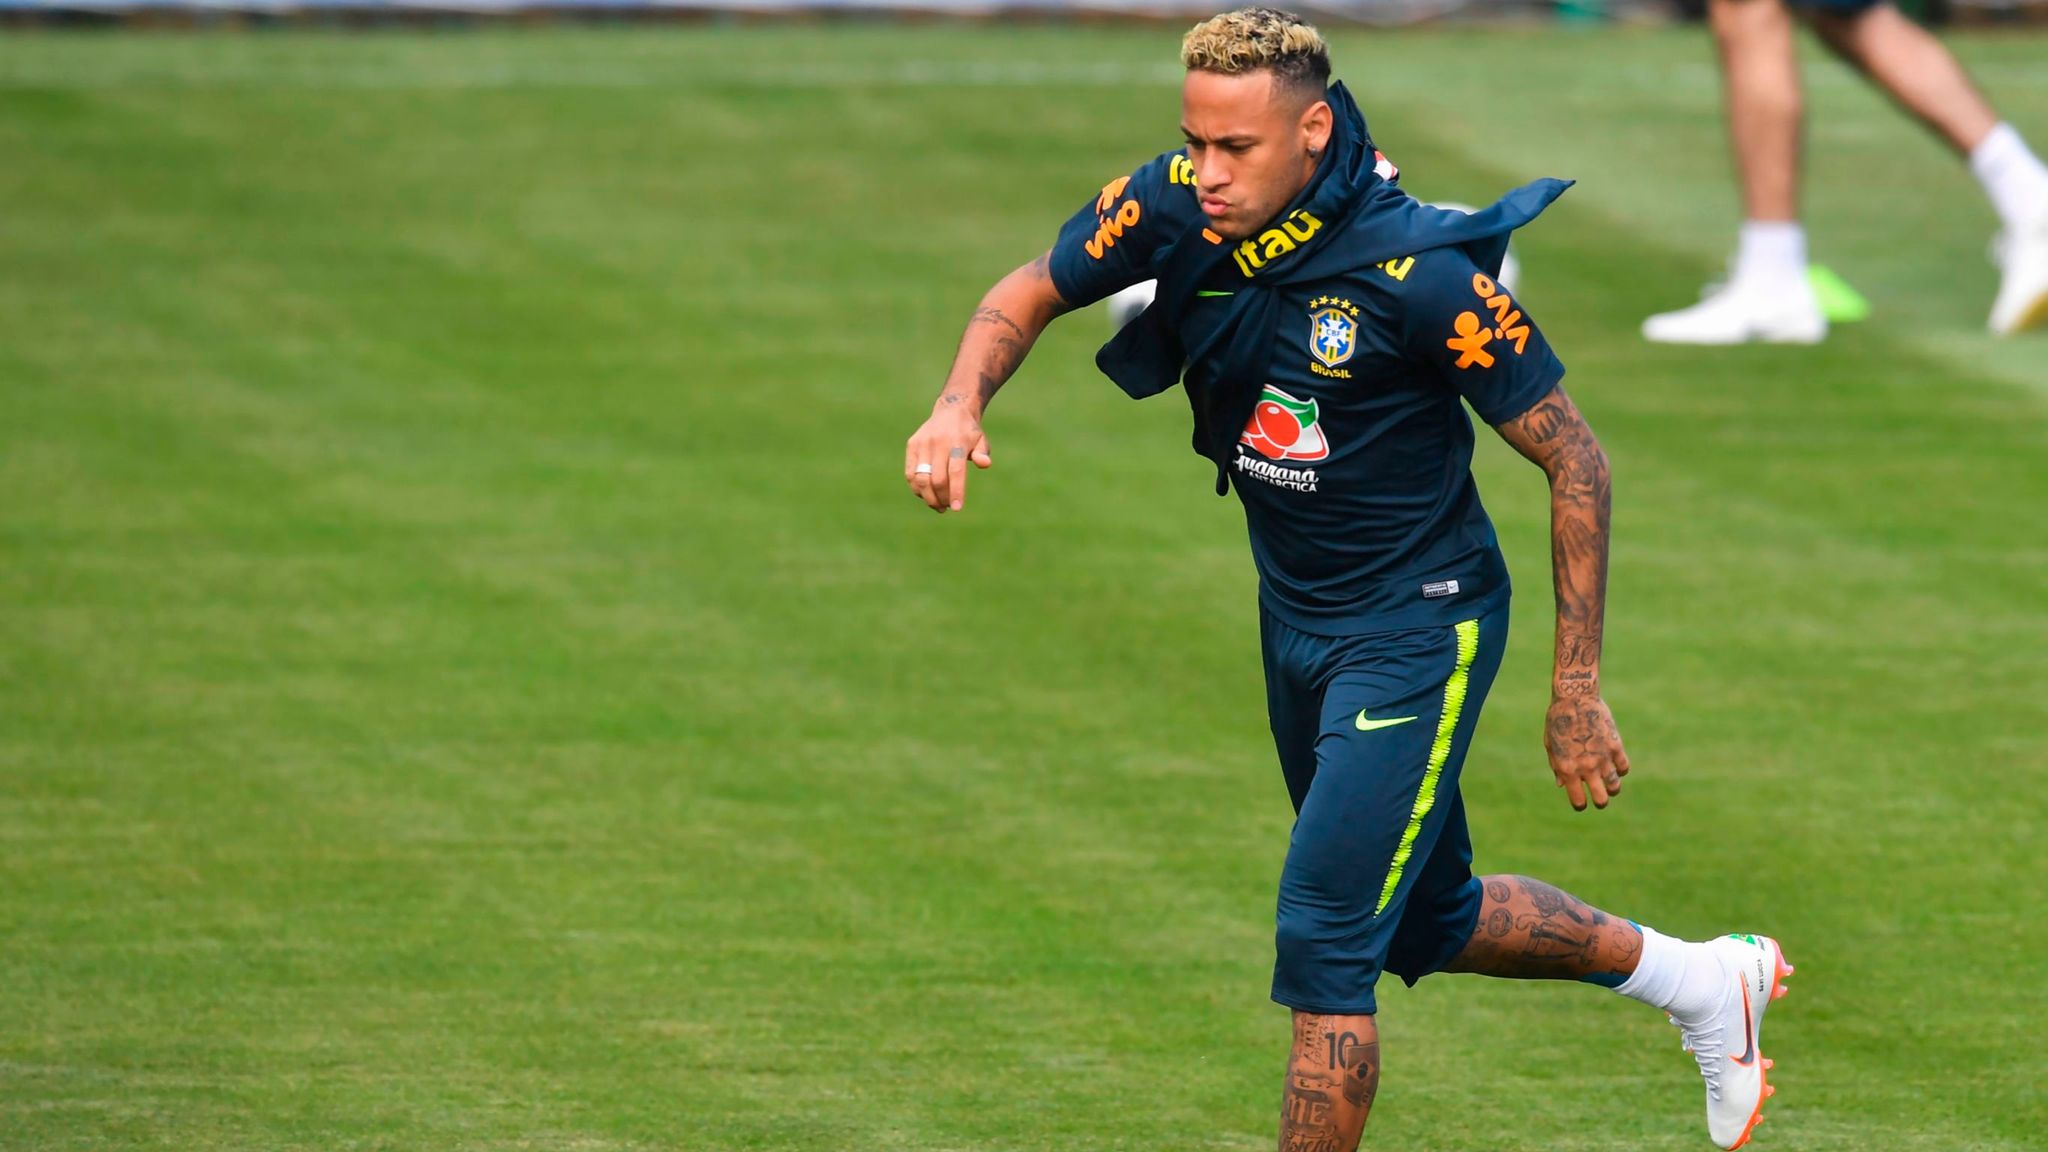 Colombia national team trains in Brasilia ahead of Ivory Coast match